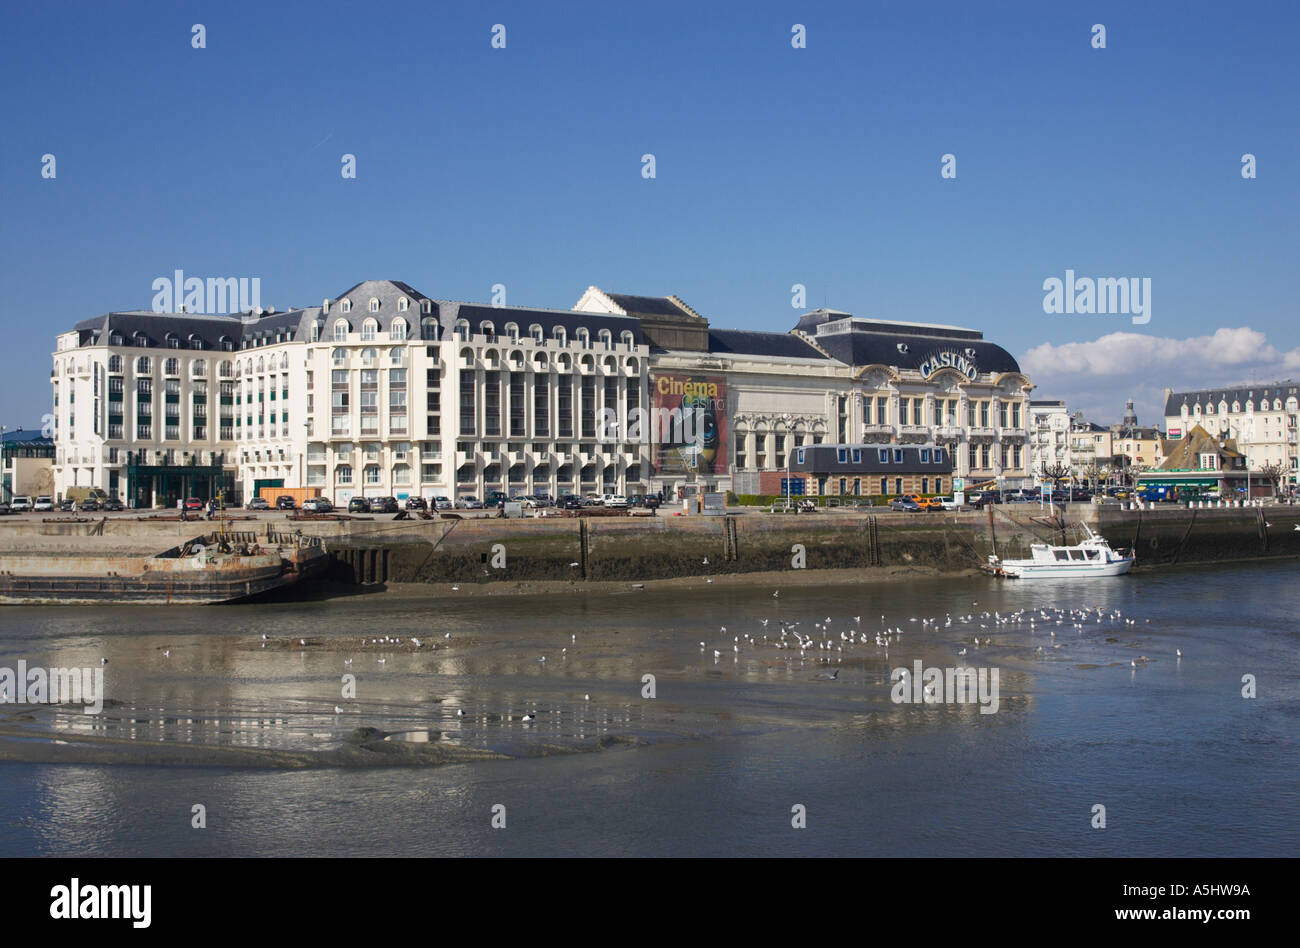 Trouville Barriere Casino and river Touques, Trouville, Normandy, France, Europe Stock Photo